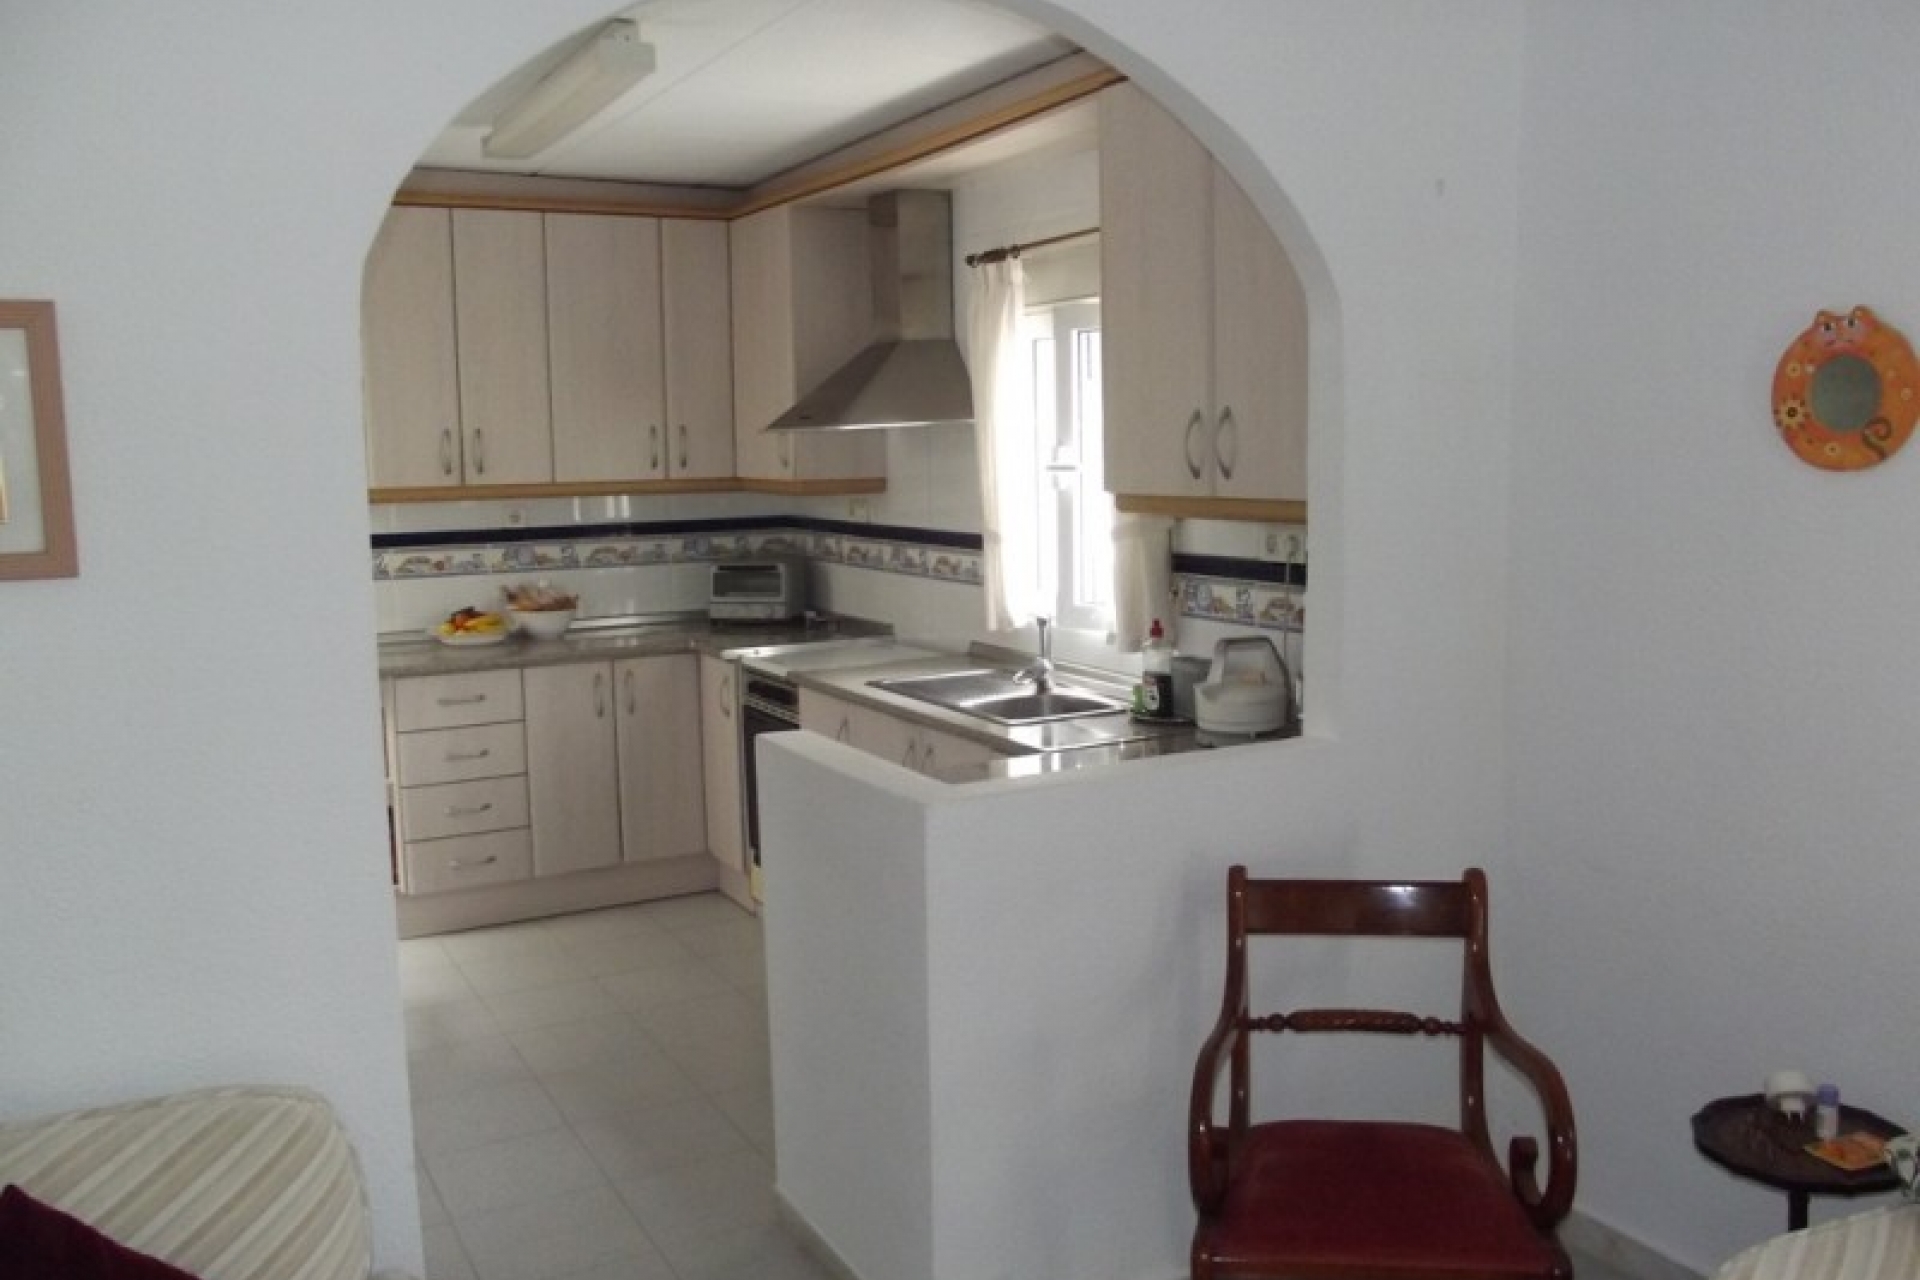 Bargain property for sale cheap Costa Blanca Spain